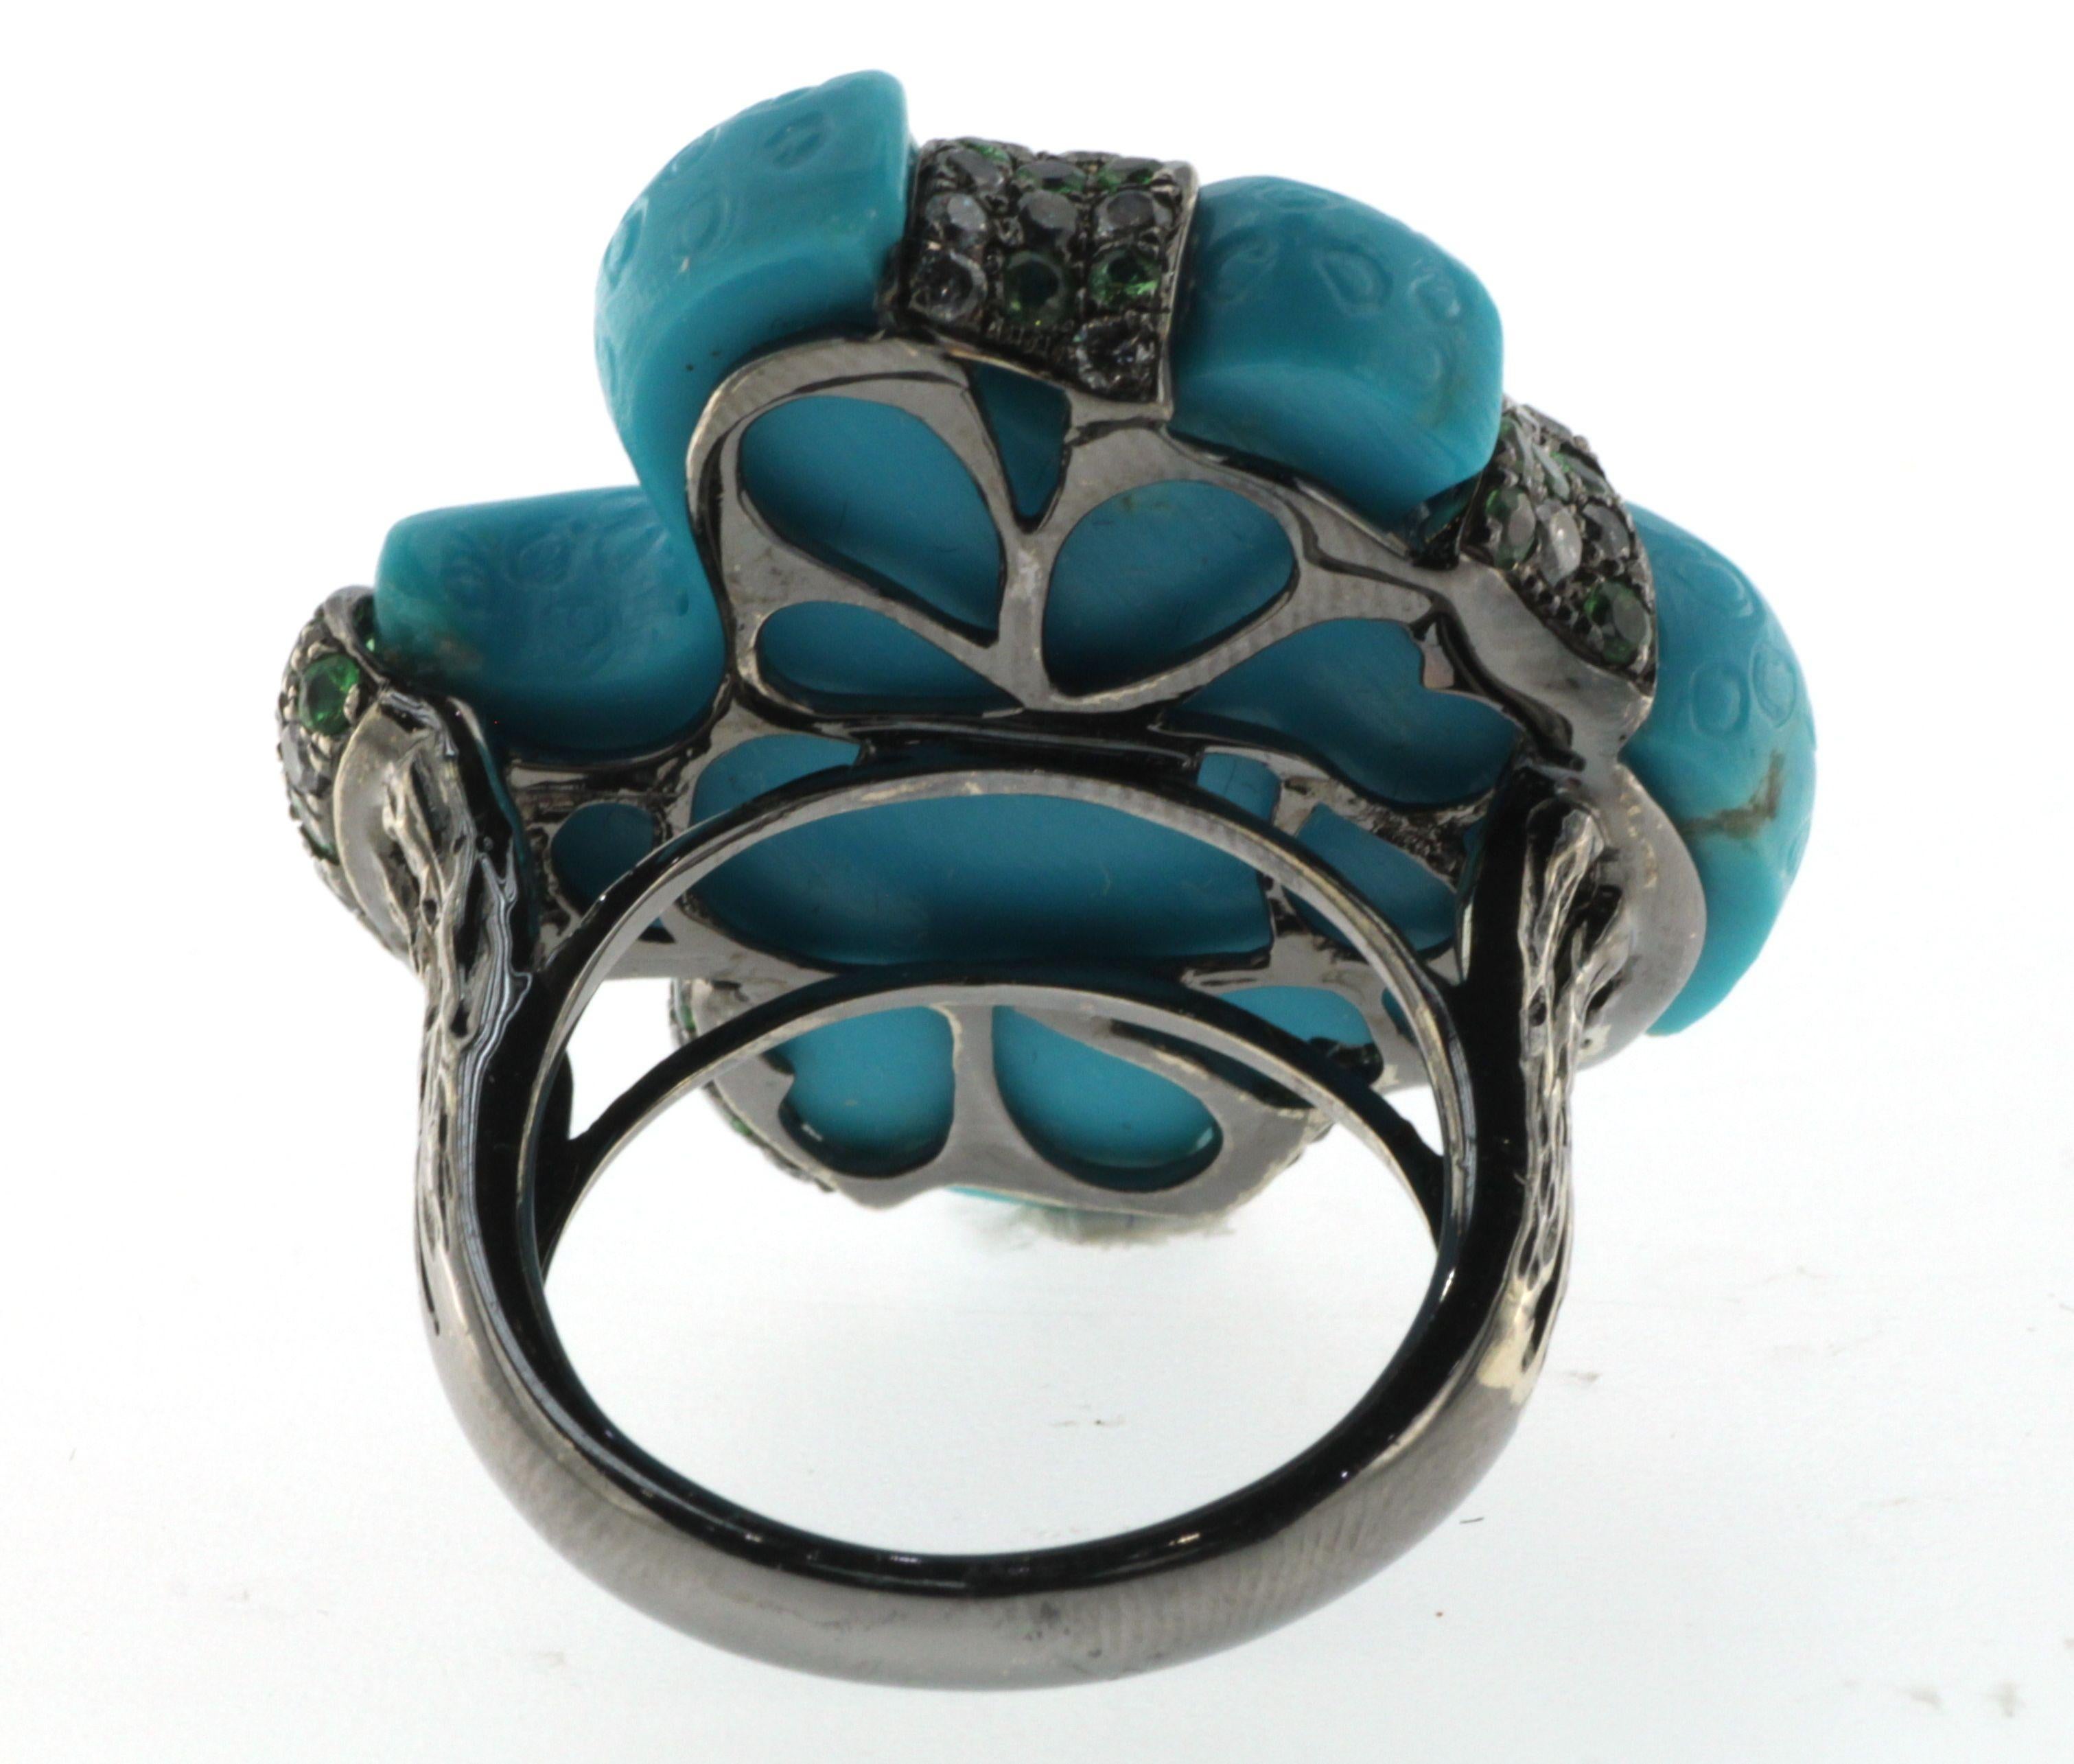 Modernist Vintage 37Ct Turquoise Green Garnet and Diamond Cocktail Ring in 14K White Gold For Sale